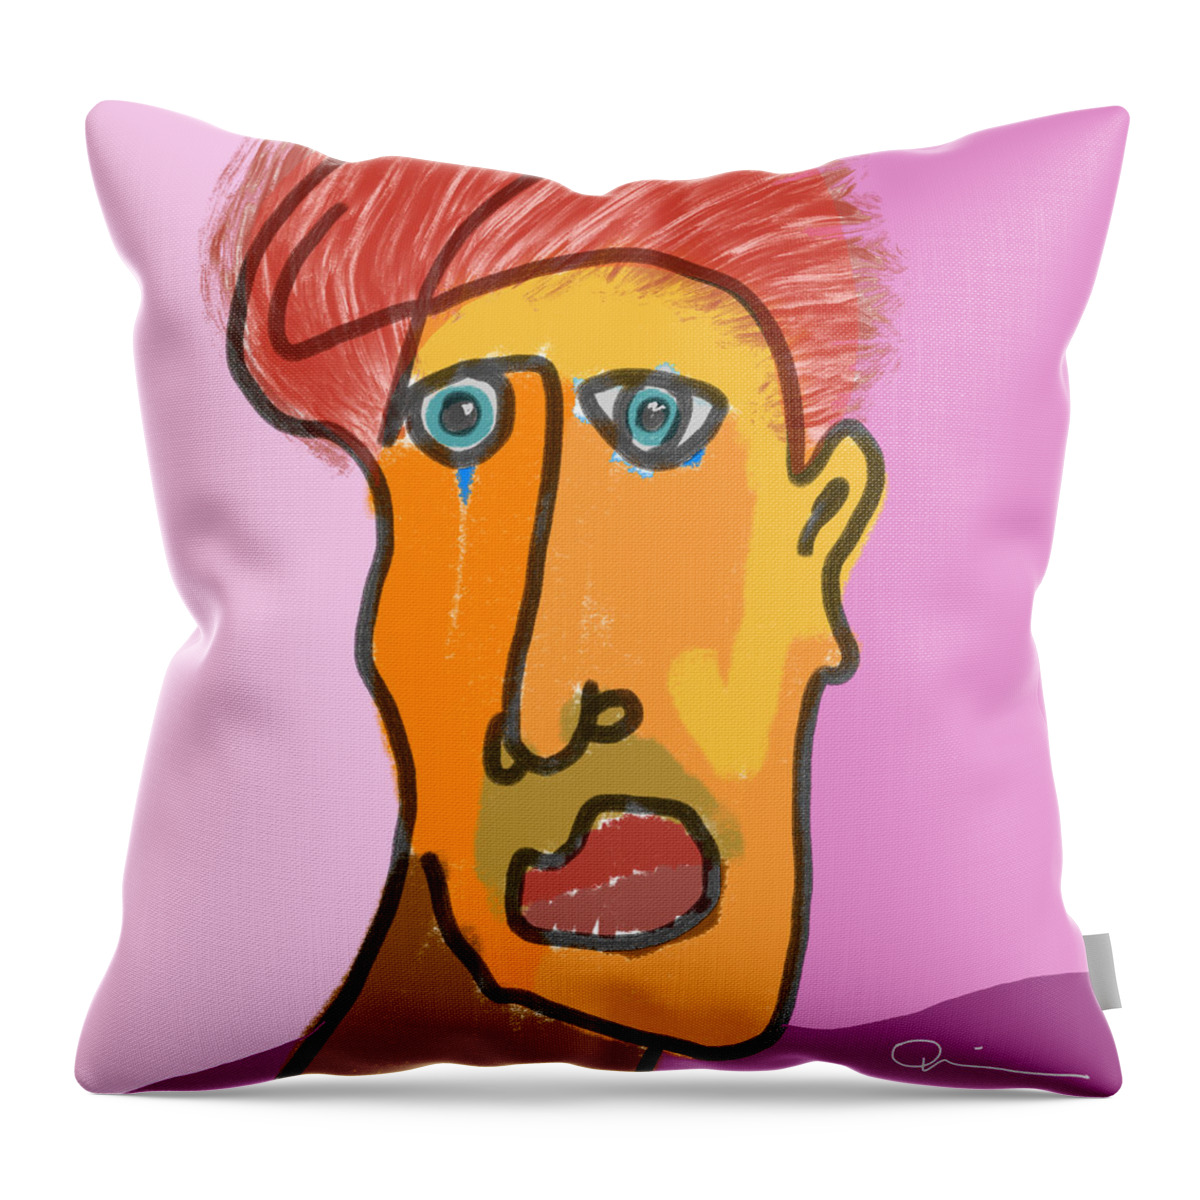 Quiros Throw Pillow featuring the digital art Cried by Jeffrey Quiros